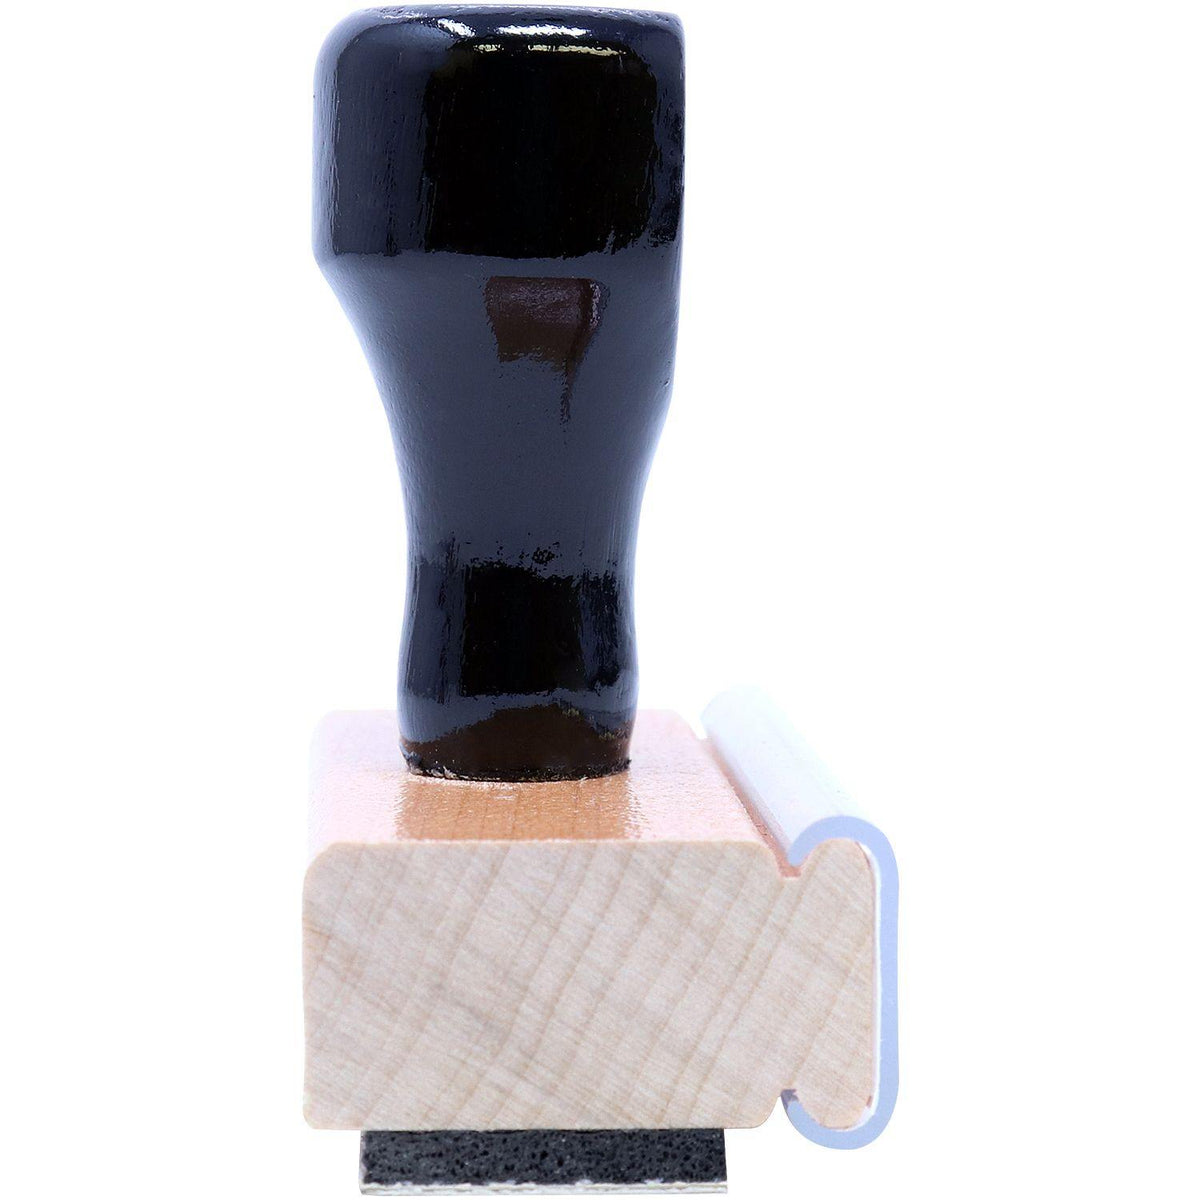 Privileged Rubber Stamp - Engineer Seal Stamps - Brand_Acorn, Impression Size_Small, Stamp Type_Regular Stamp, Type of Use_Business, Type of Use_Finance, Type of Use_Legal